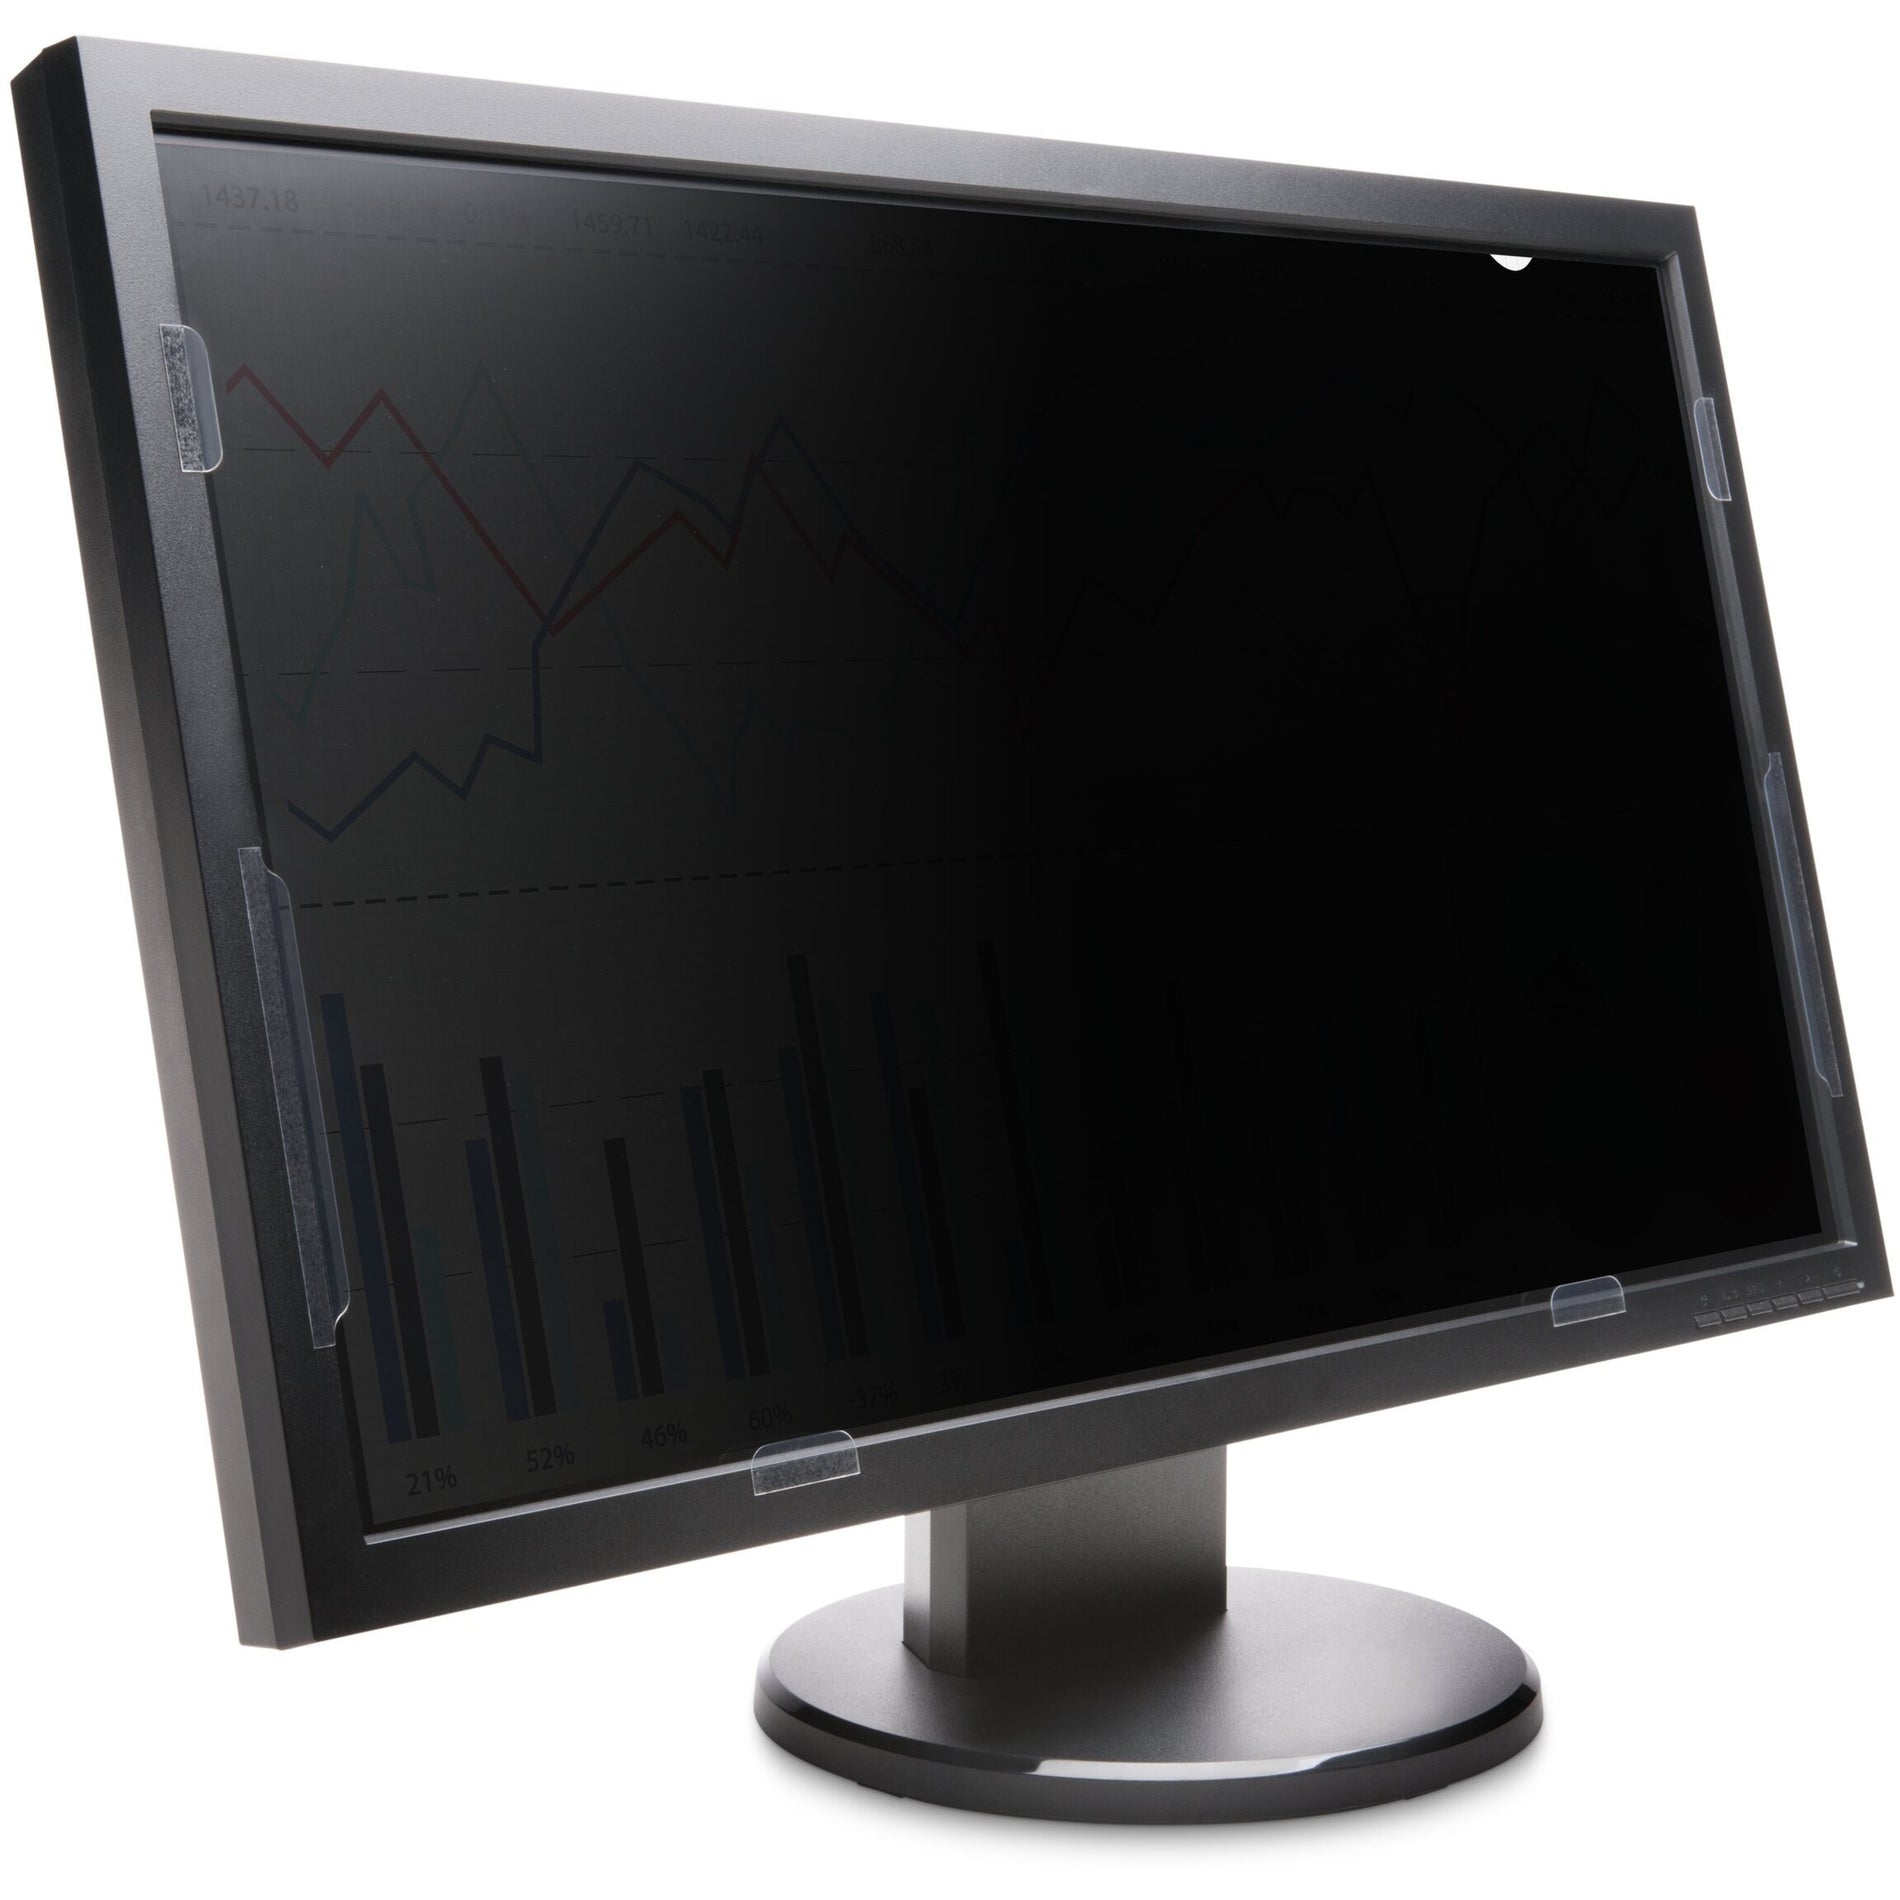 Kensington K52105WW FP170 Privacy Screen for 19 Monitors (5:4), Smooth Touch Coating, Blue Light Reduction, Anti-reflective